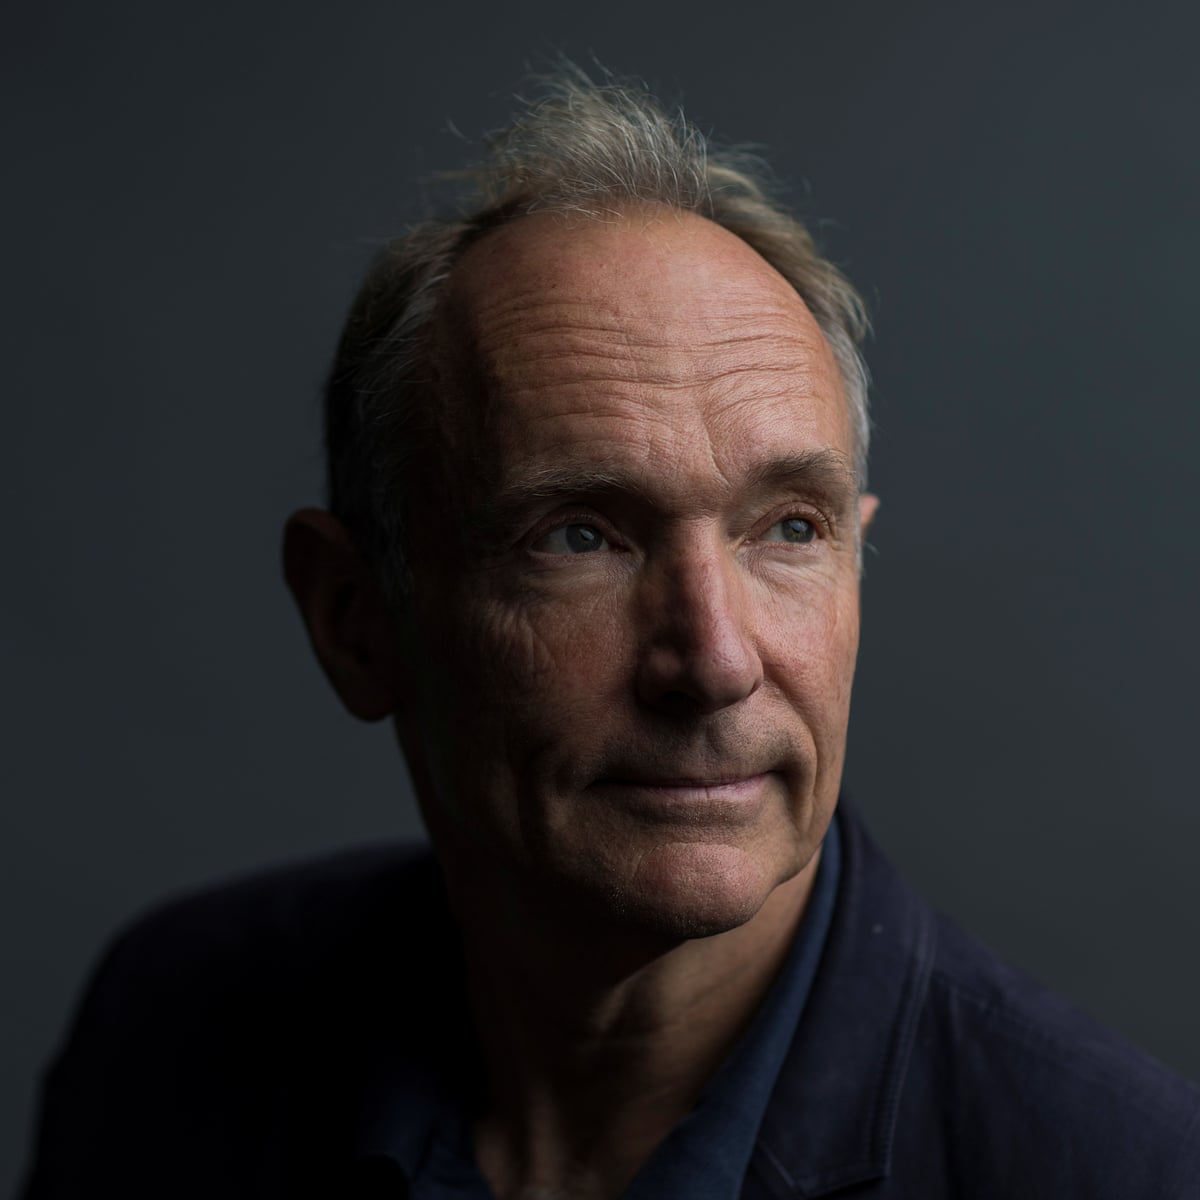 Tim Berners-Lee on 30 years of the world wide web: 'We can get the web we  want' | Tim Berners-Lee | The Guardian